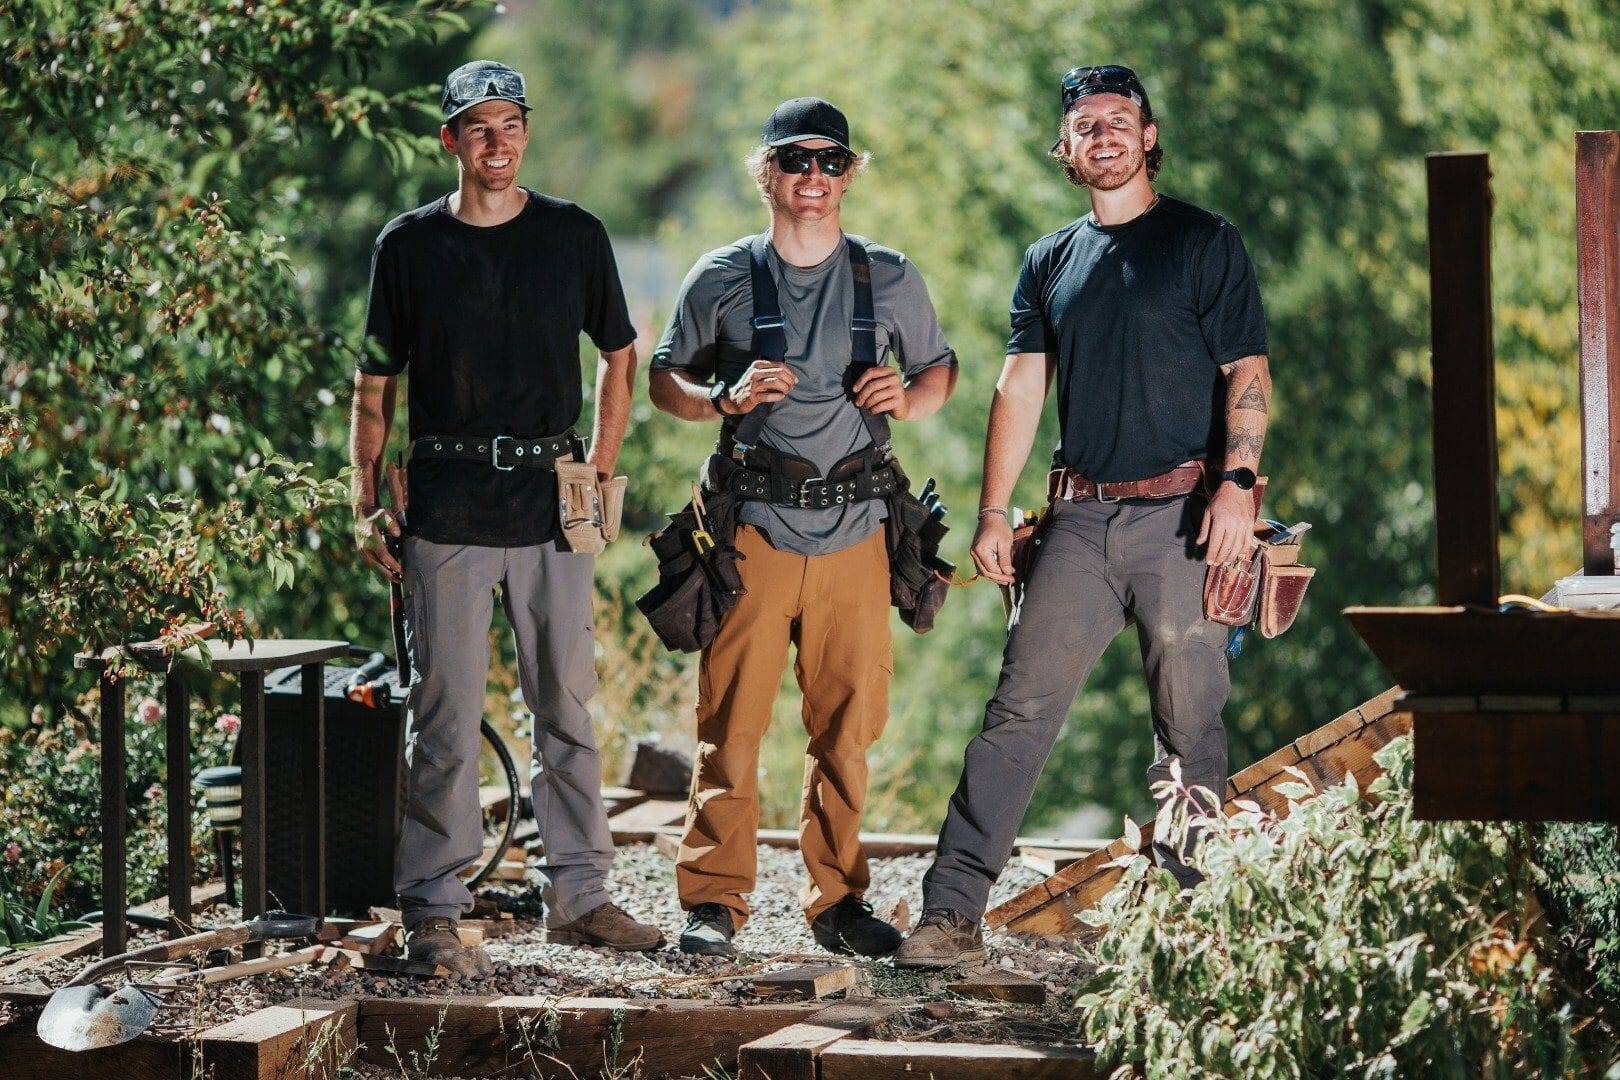 A trio of trade professionals with Elevated Independent Energy pose together in Truewerk workwear at a jobsite.